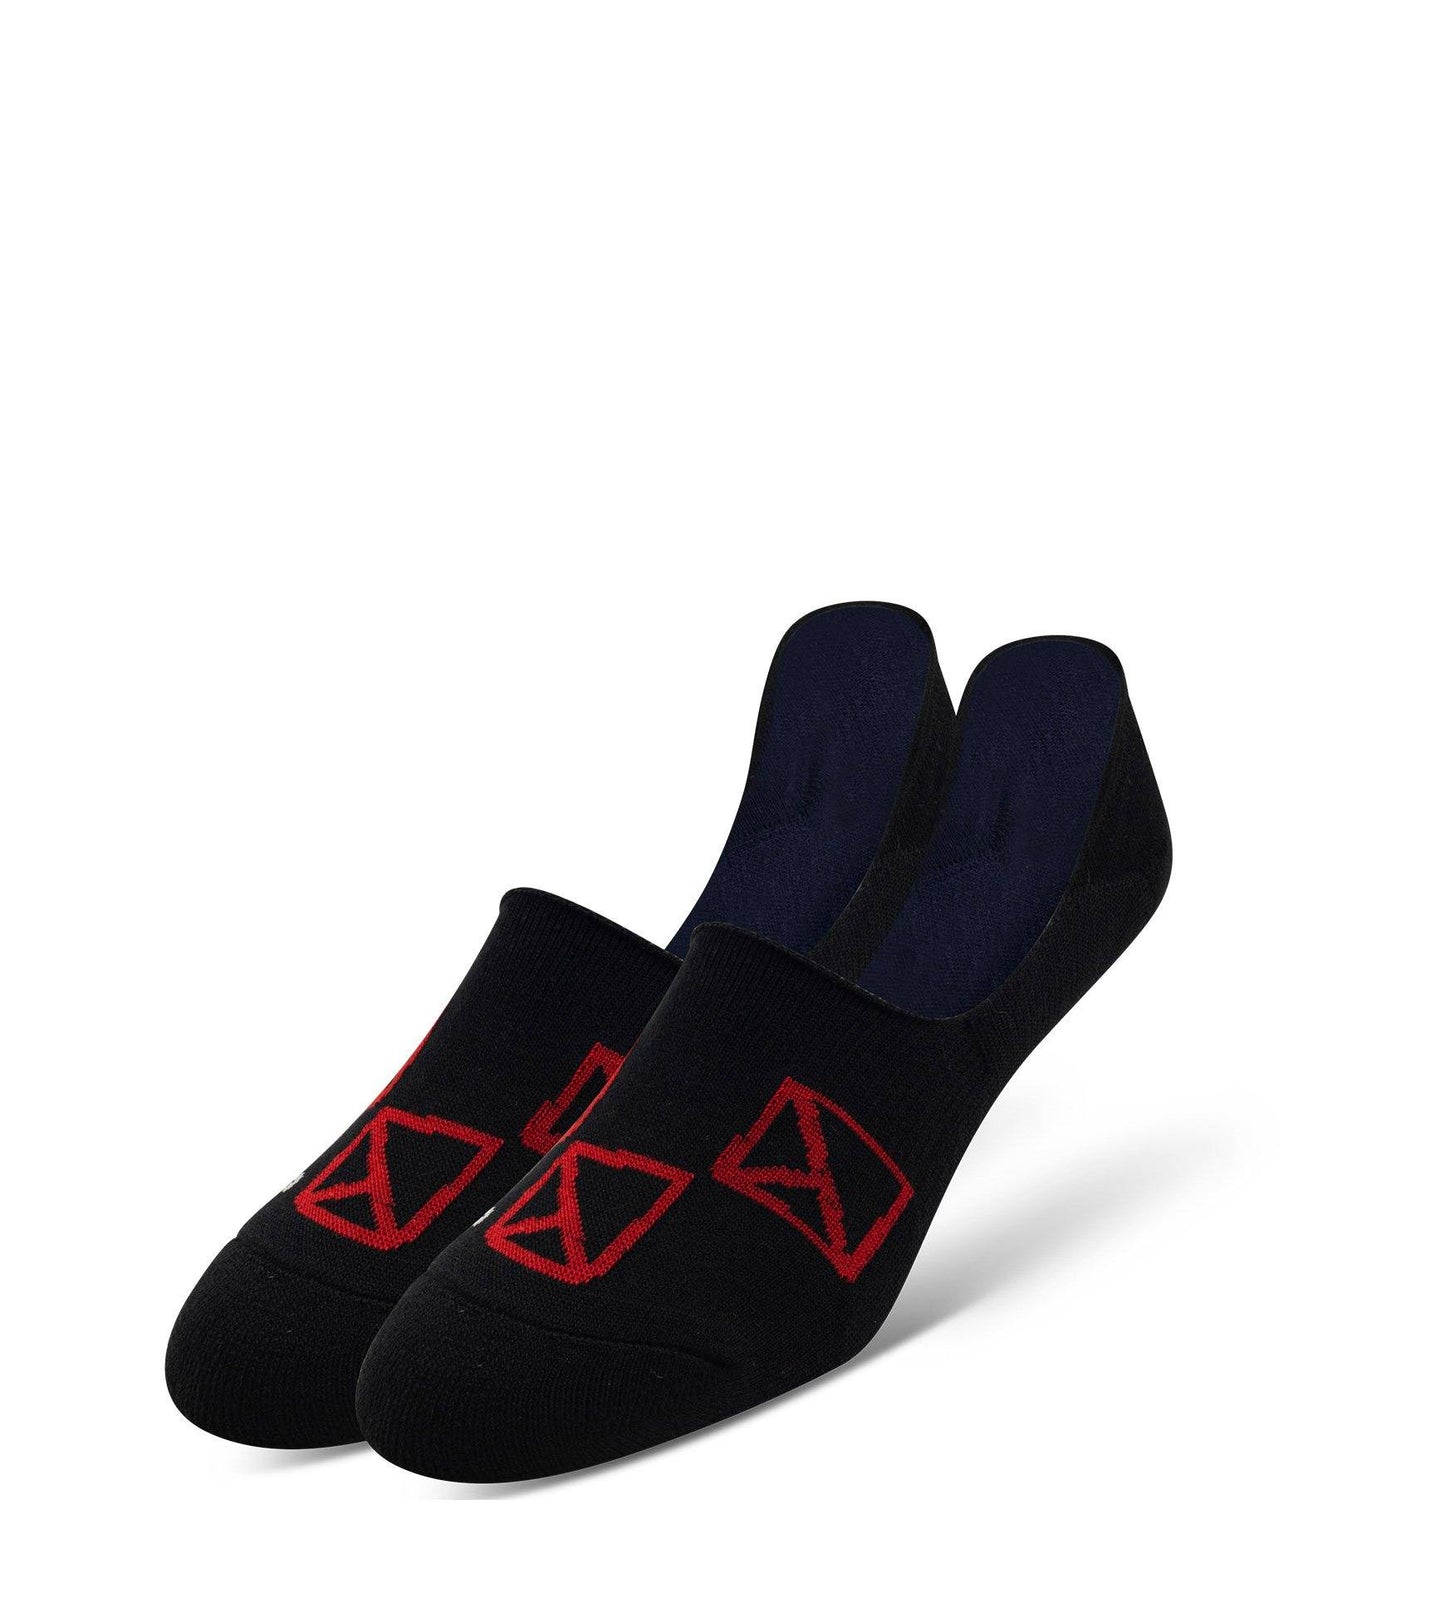 Cushion No Show Socks 3 Pack red boxes on black